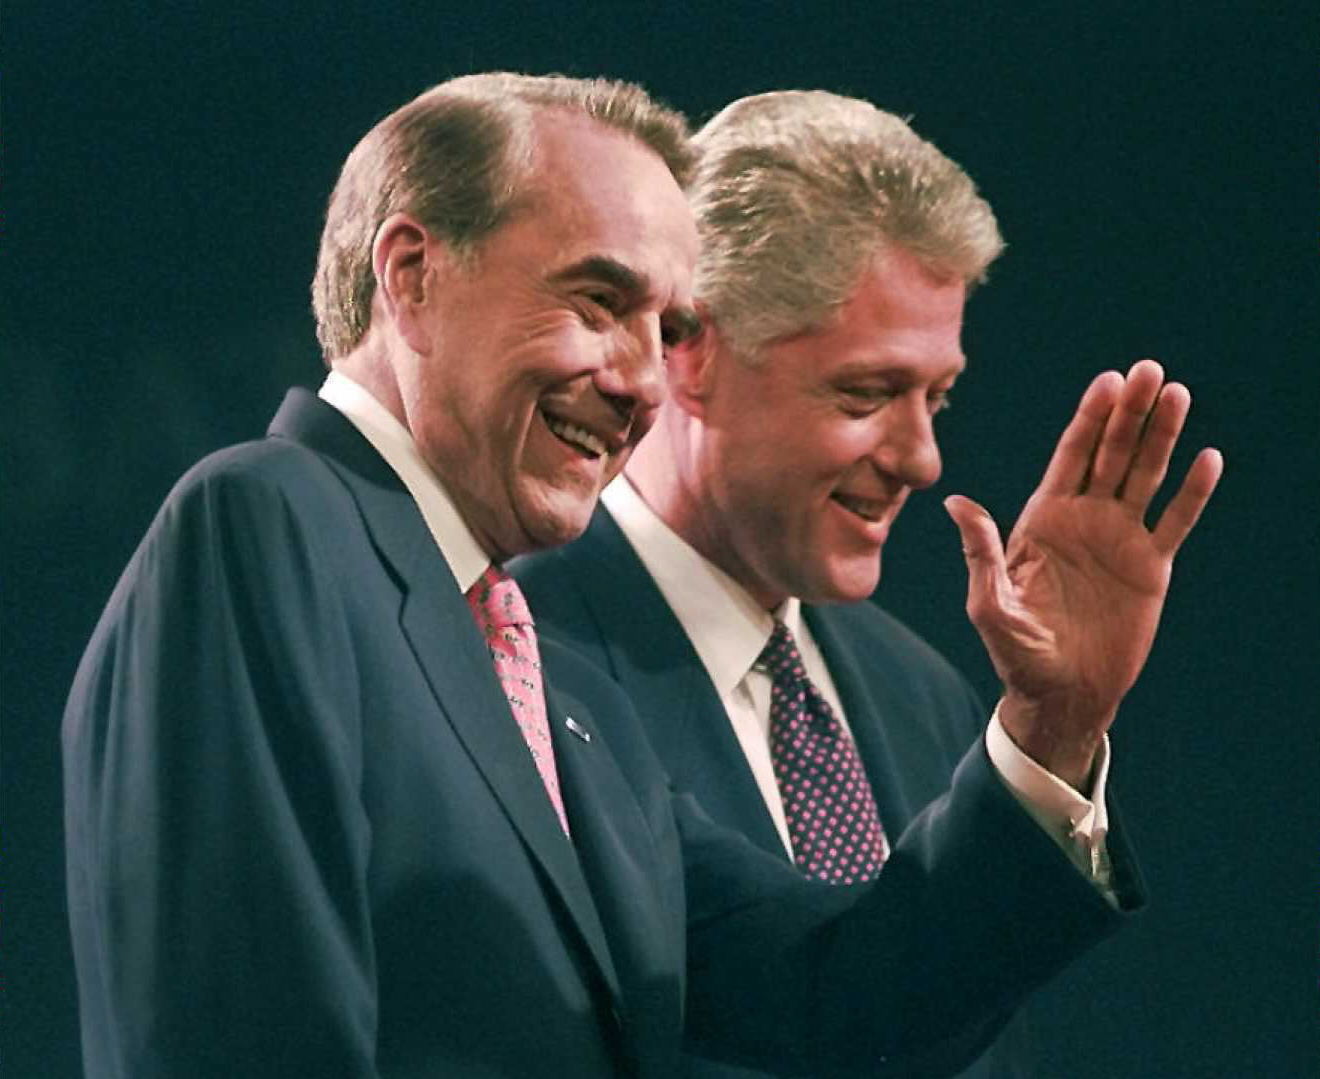 Republican challenger Bob Dole waves to the crowd along side of President Bill Clinton at the conclusion of their first debate in Hartford, CT.